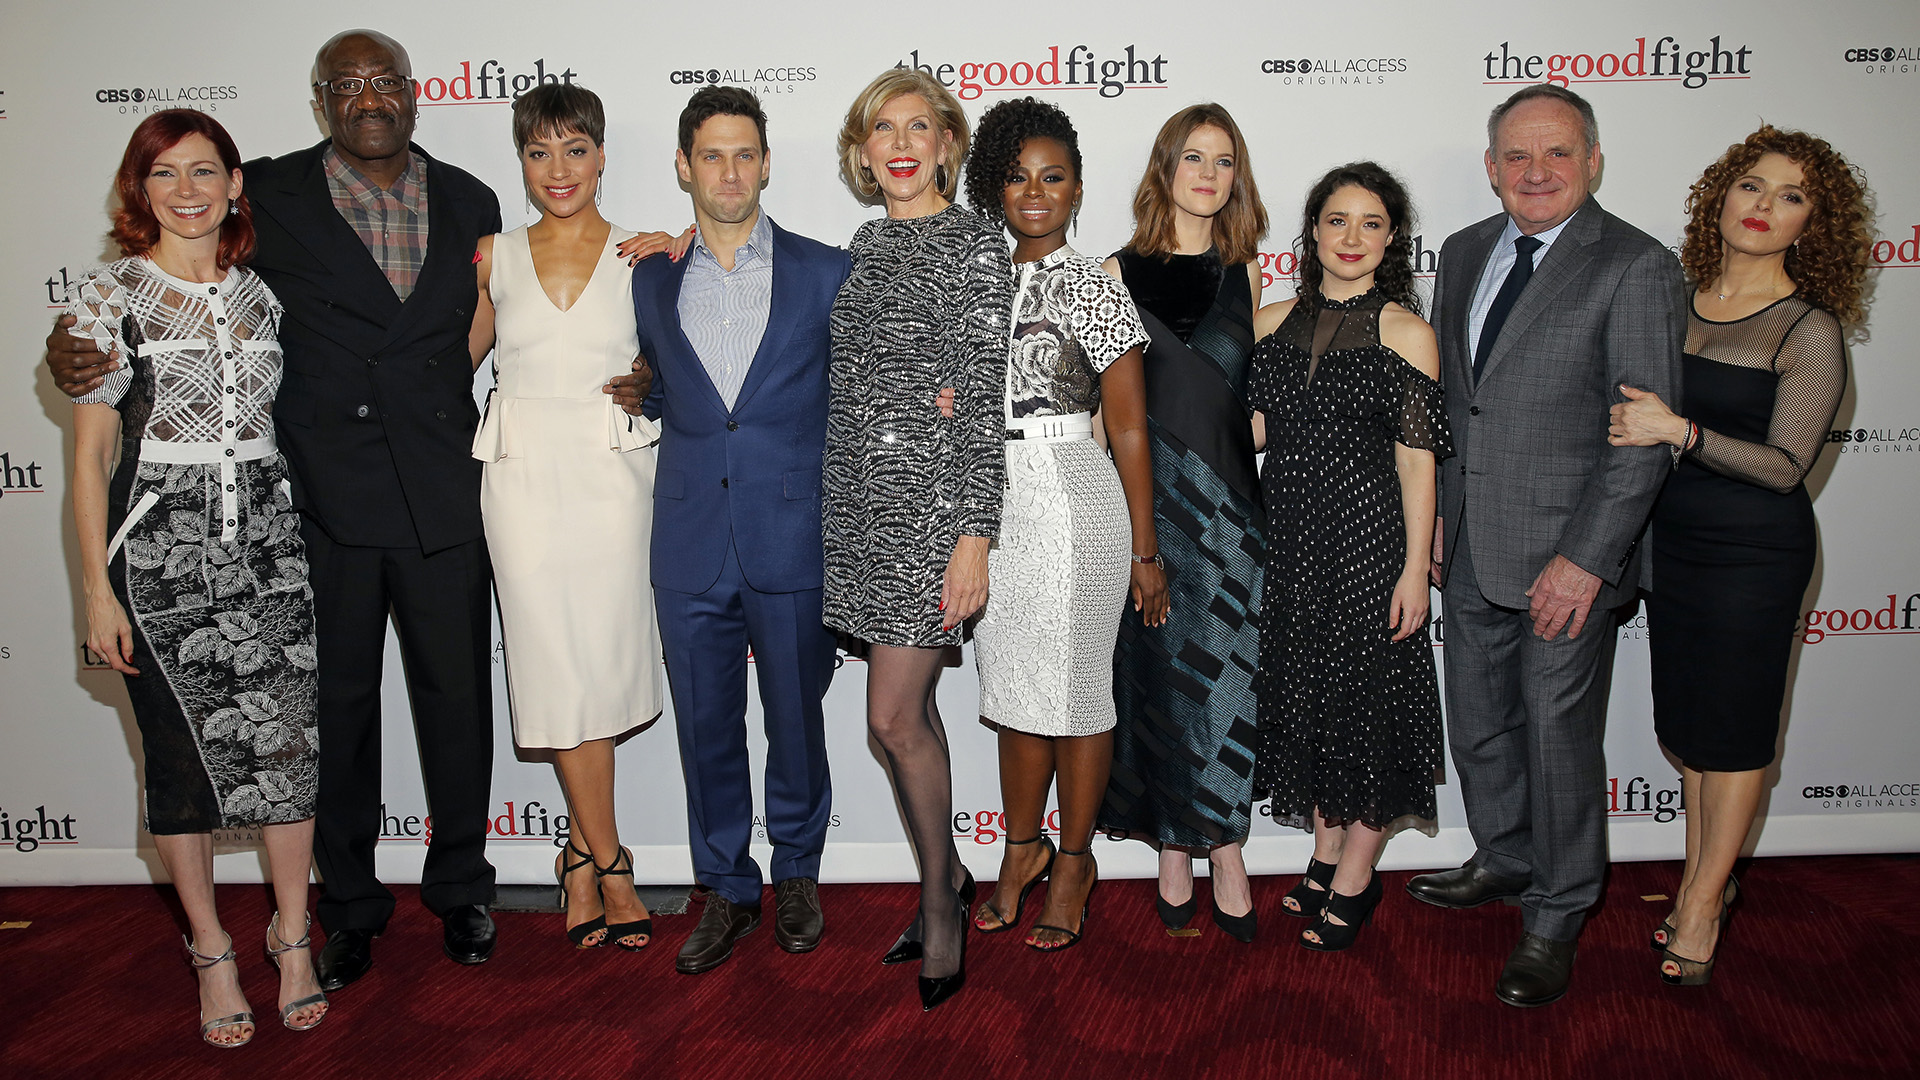 The Good Fight cast poses together for a glamorous group shot before entering the theater.